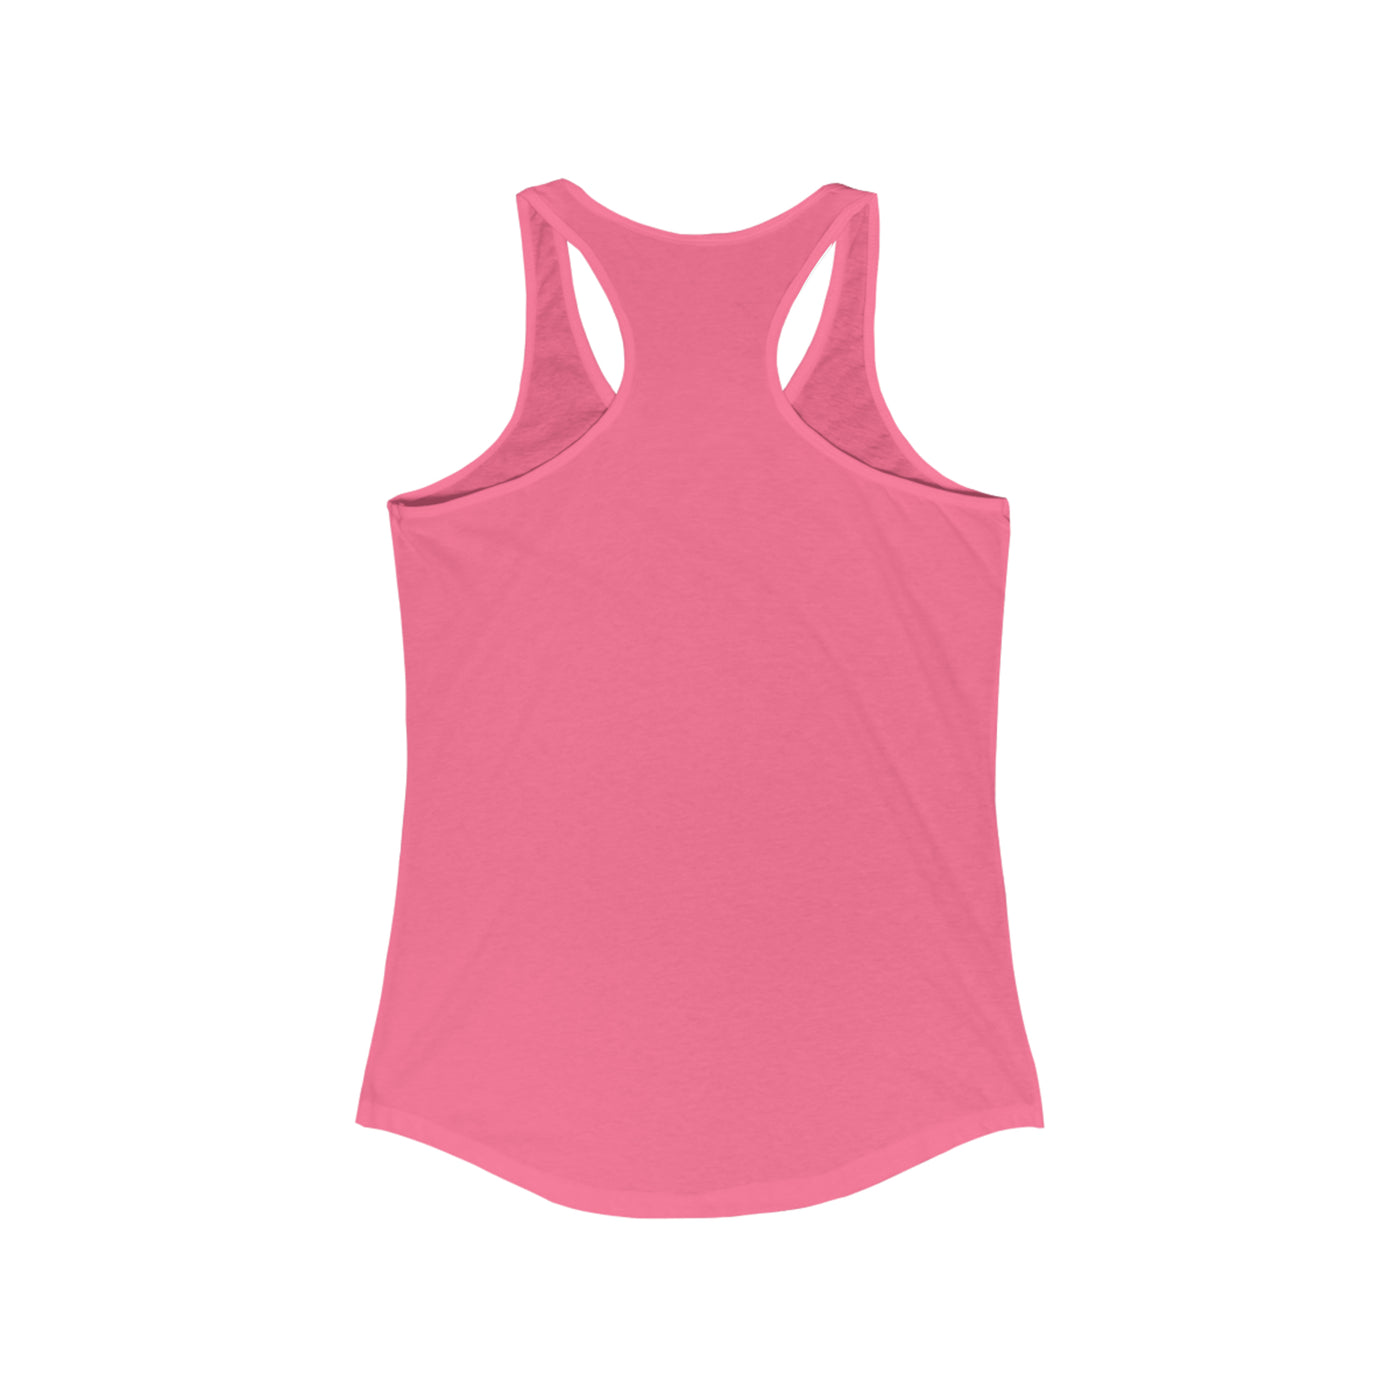 Me and the beach love at first sight Women's Ideal Racerback Tank